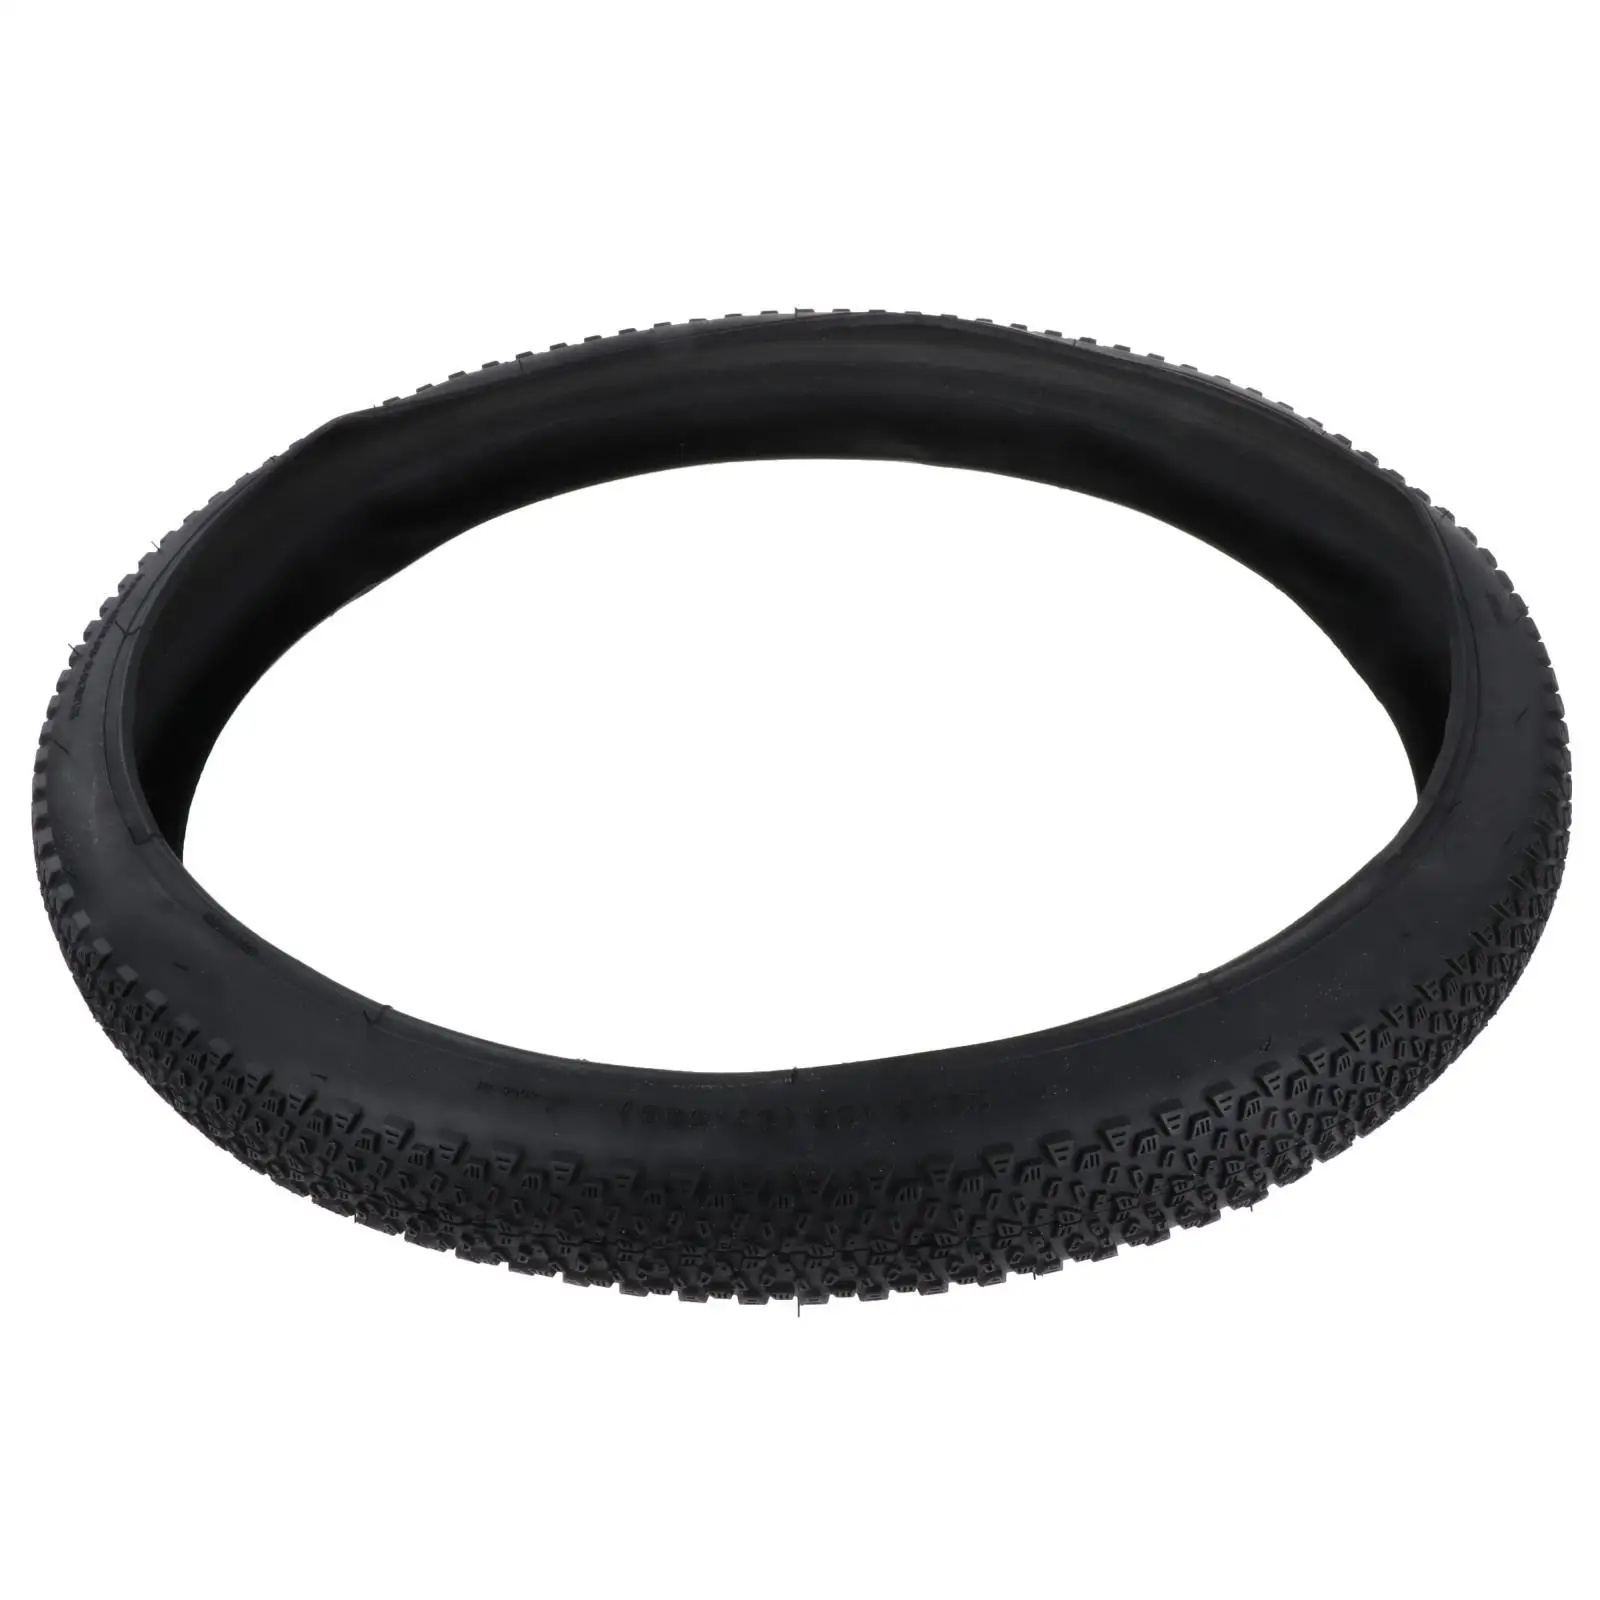 Mountain Bike Tire Wear Resisting ADAPT Various Road Conditions Balance Portable Lasting Bicycle Outer Tyre for Bike Tour